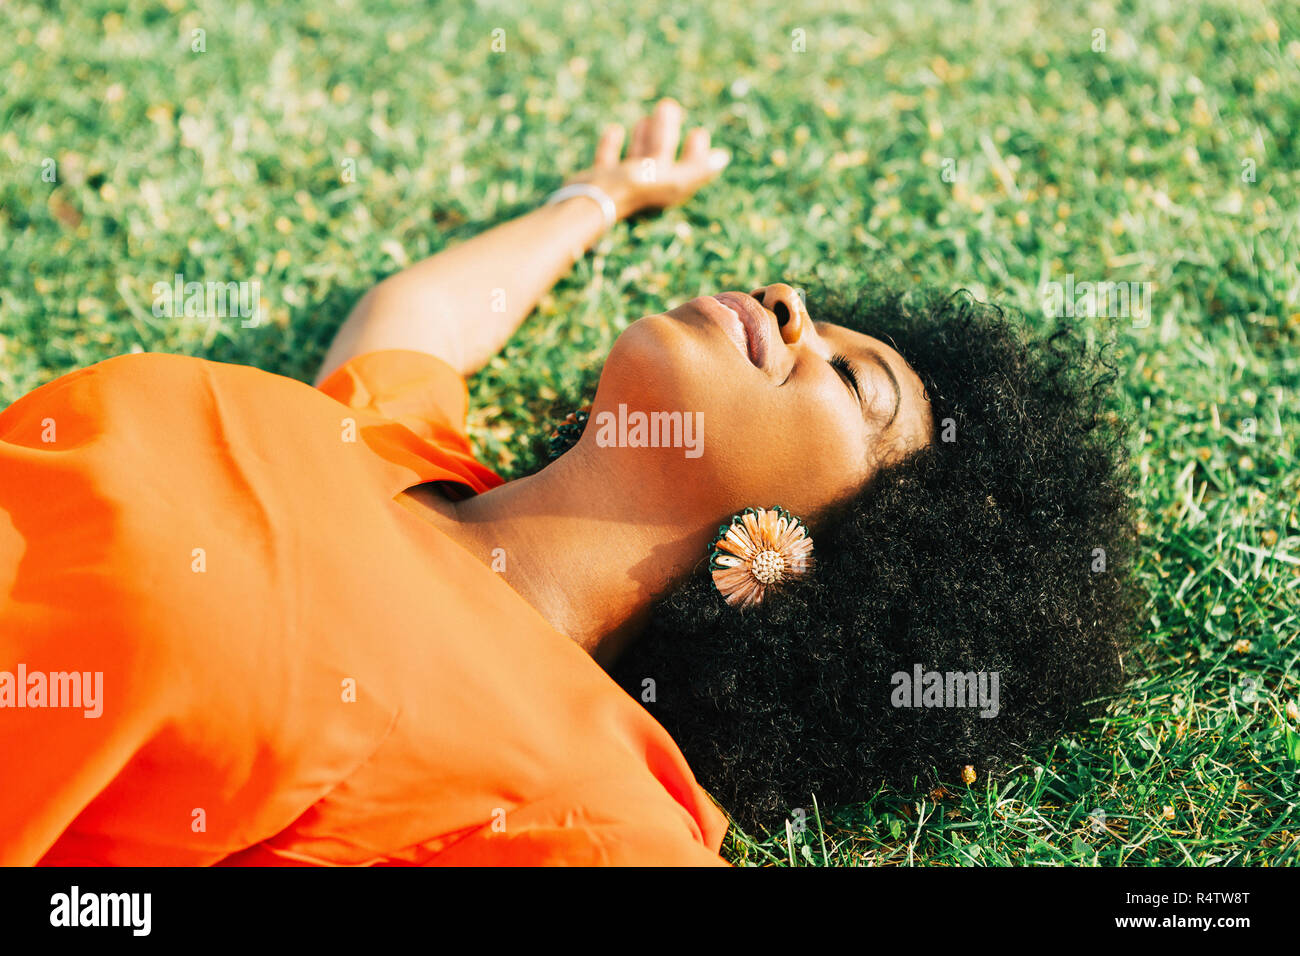 Carefree, serene young woman laying in sunny grass Stock Photo